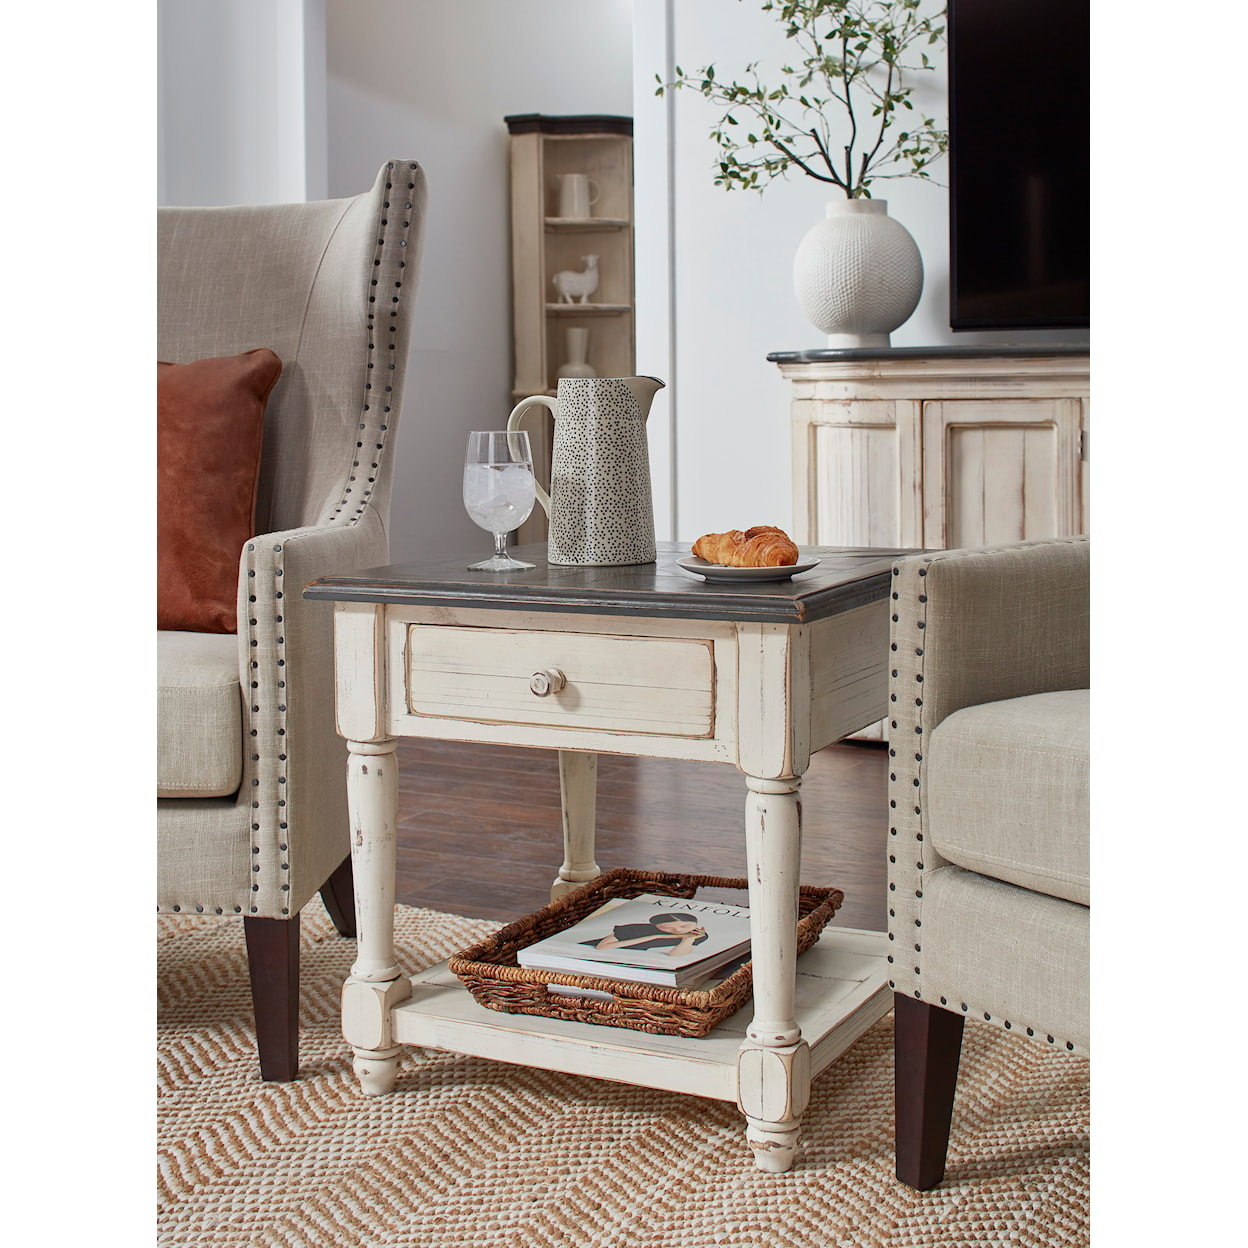 Aspenhome Hinsdale End Table